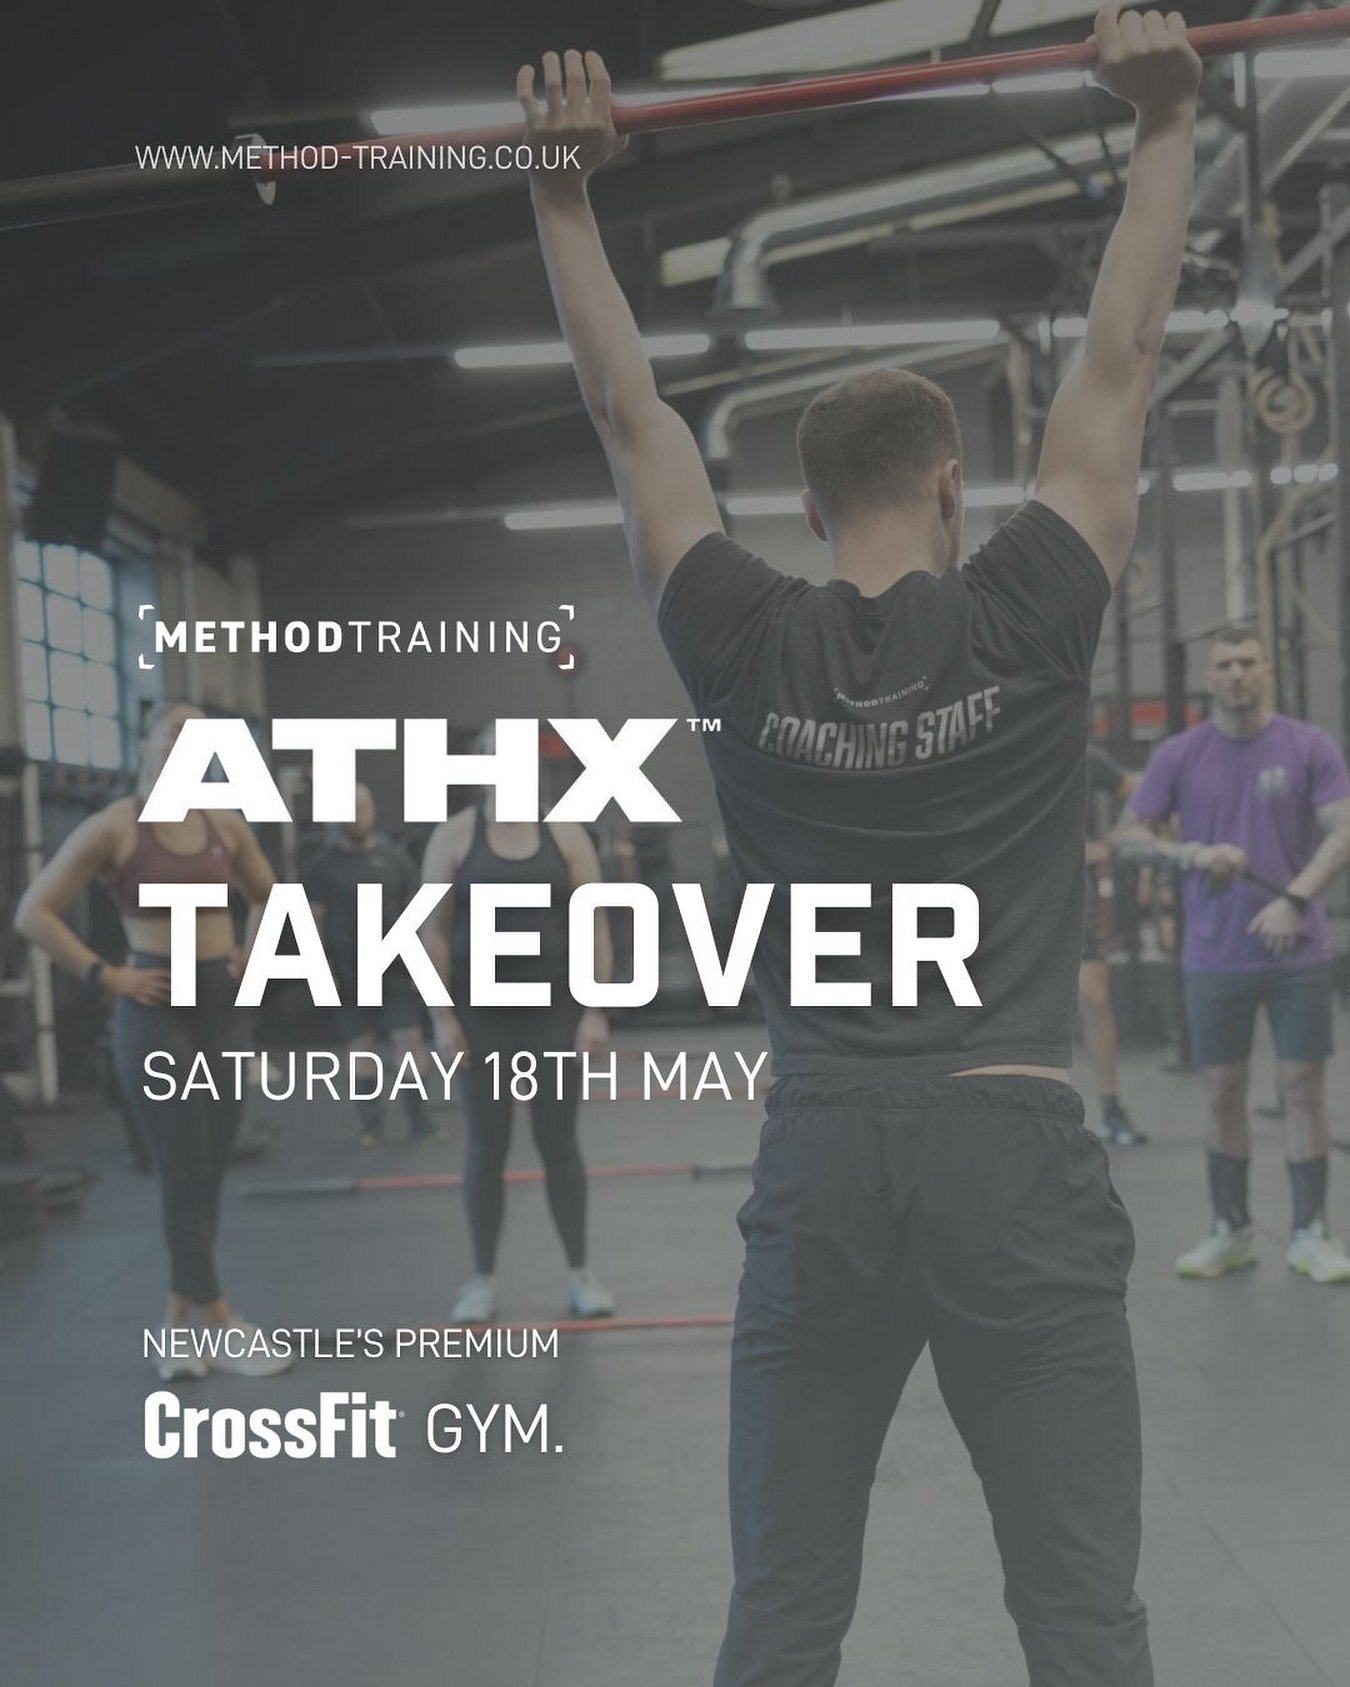 MT members,
Saturday 18th May we are hosting a special ATHX takeover day.  Classes will be 90 minutes with 30 spaces available per class.

3 x sessions on the day which feature:
Intro to ATHX - what it is and how the event can give you a reason to tr